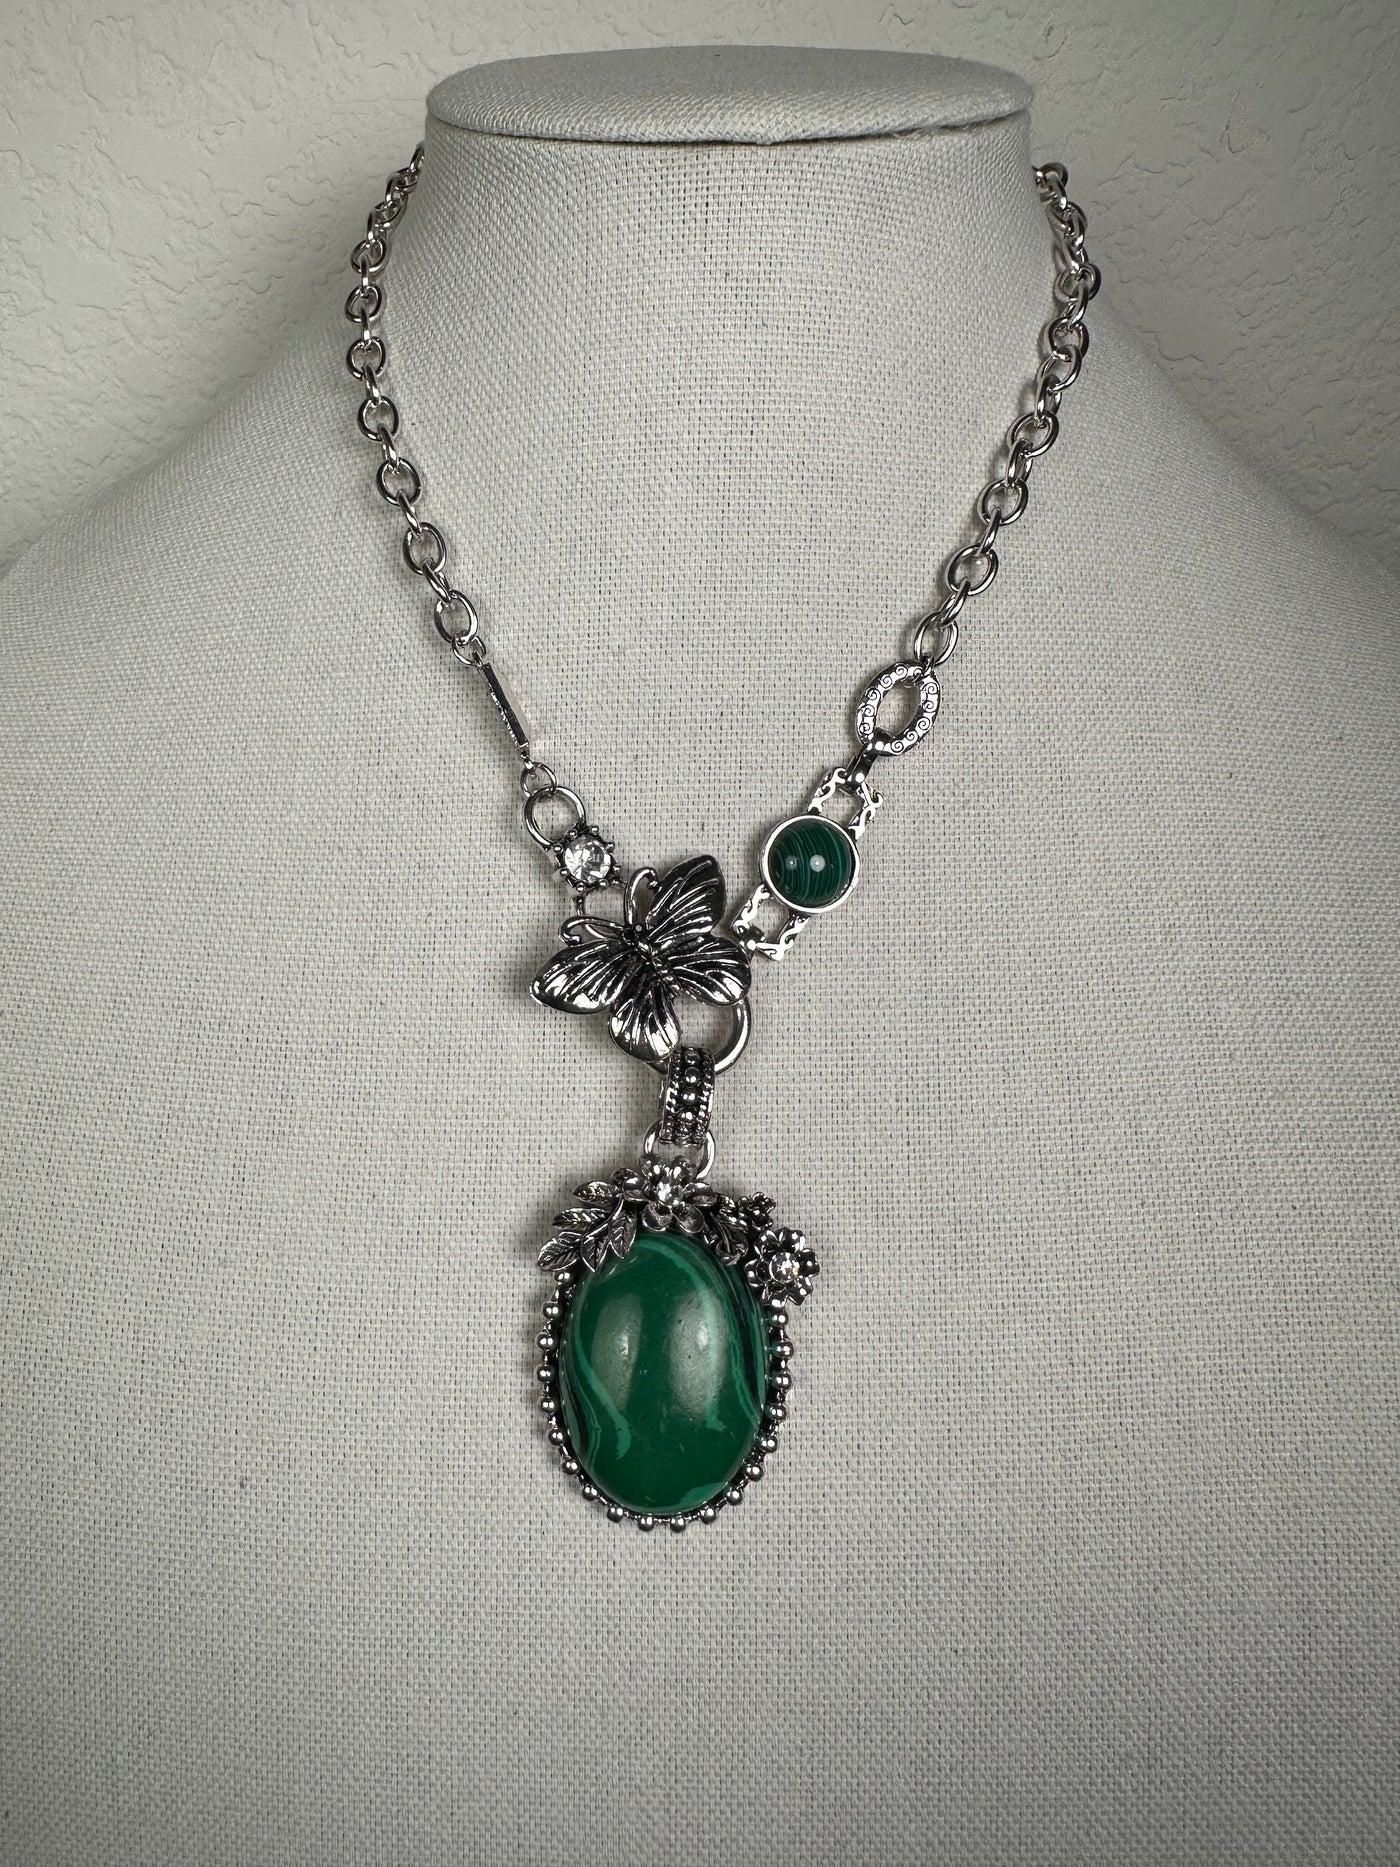 Silver Tone Necklace with an Ornate Oval Green Howlite Malachite Drop